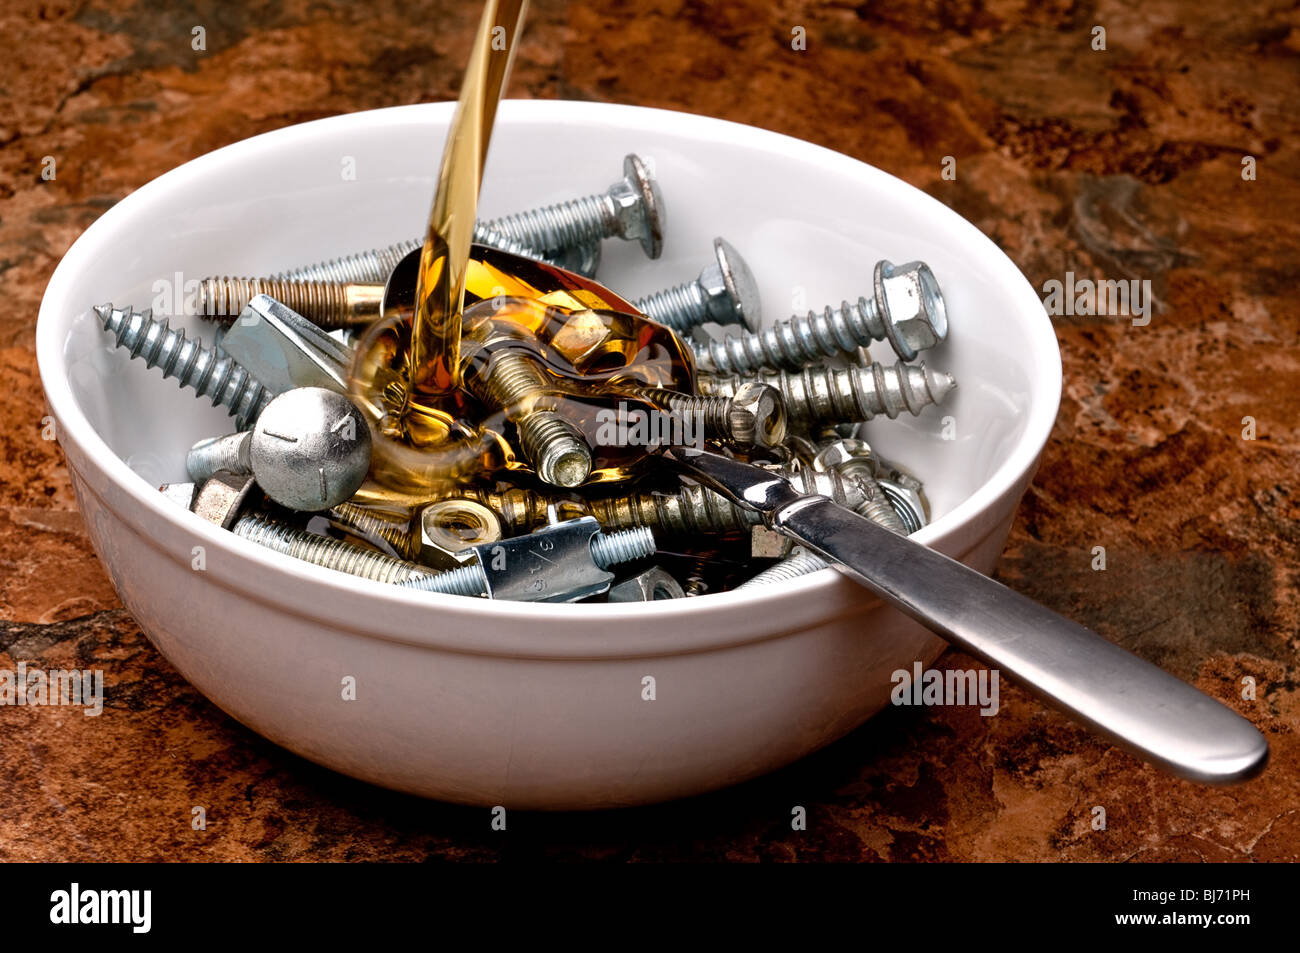 Horizontal image of oil being poured onto a breakfast serving of nuts and bolts Stock Photo